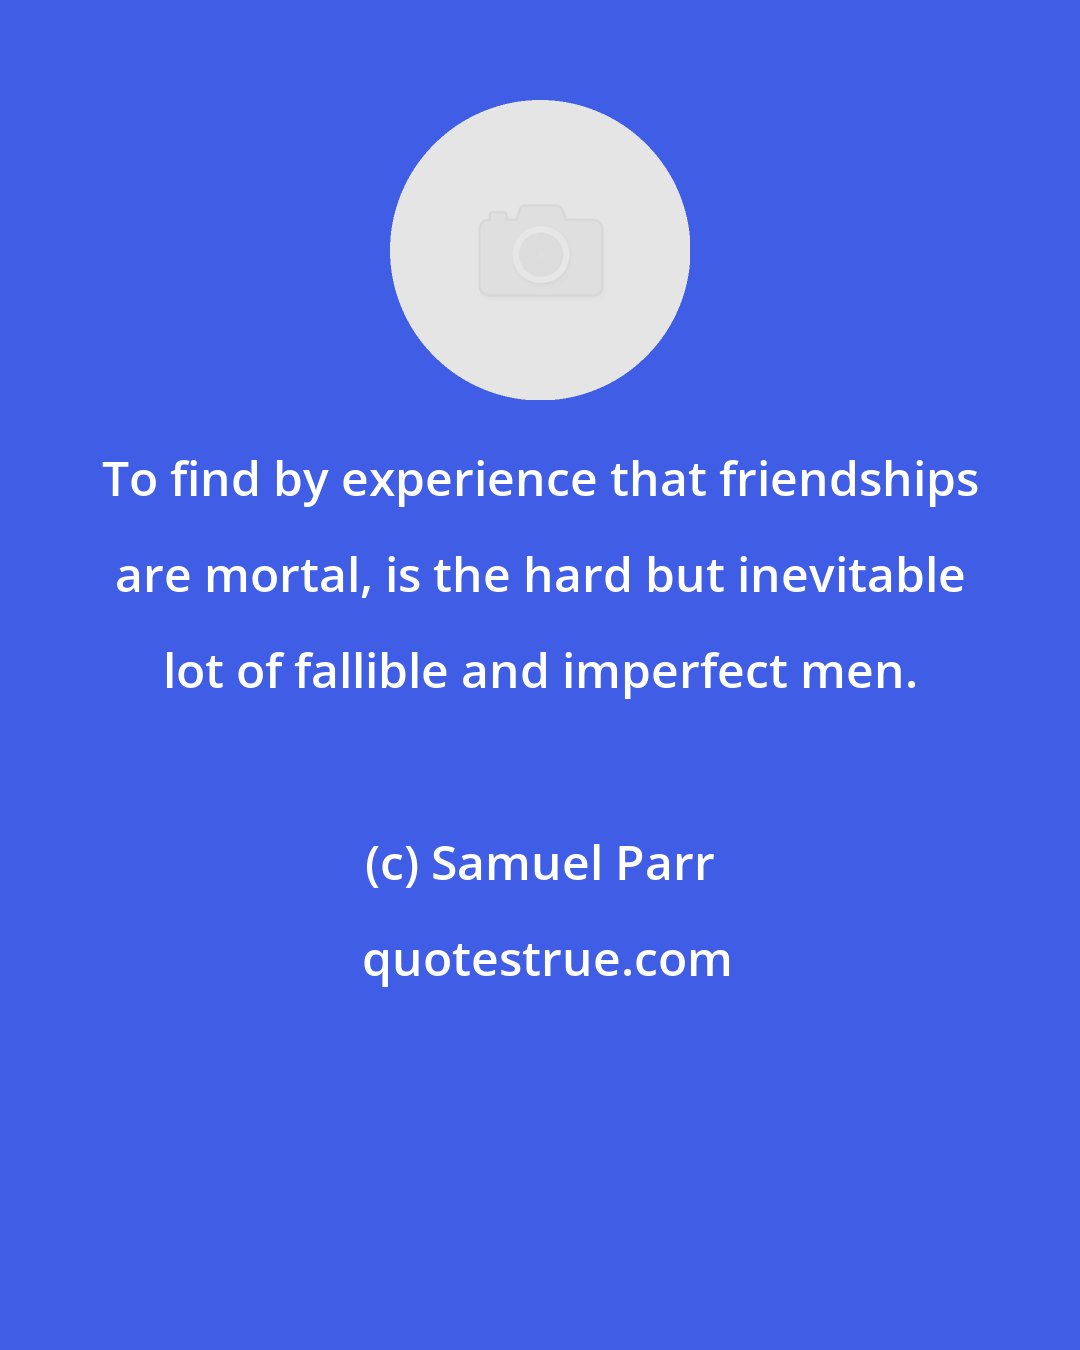 Samuel Parr: To find by experience that friendships are mortal, is the hard but inevitable lot of fallible and imperfect men.